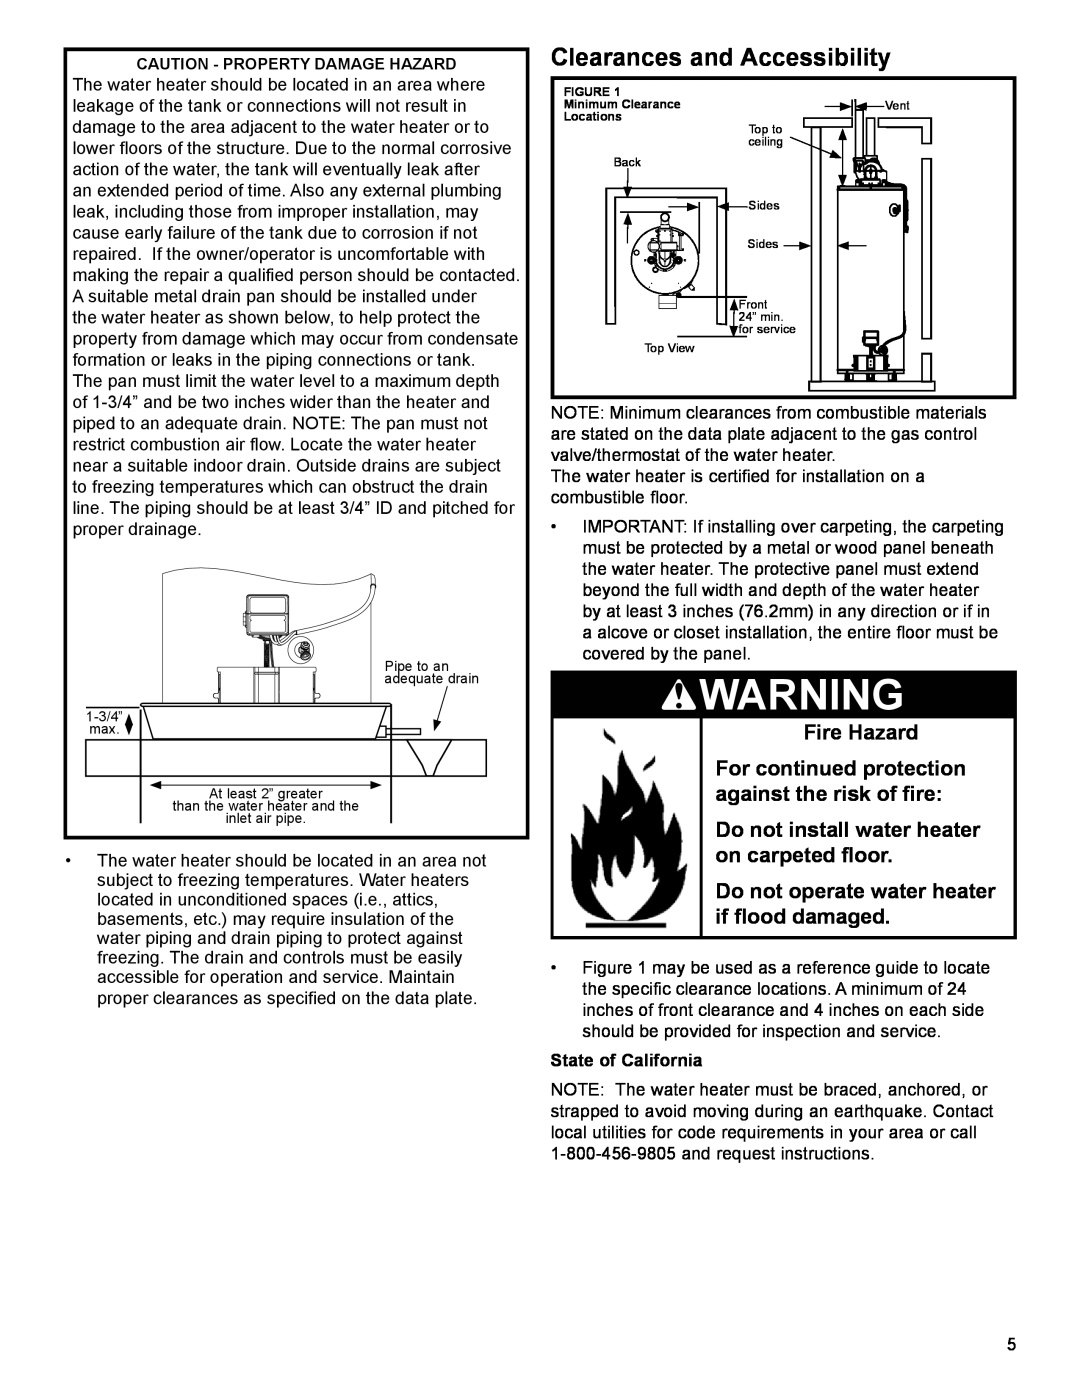 American Water Heater 50-60K BTU, 40-42K BTU Clearances and Accessibility, Do not install water heater on carpeted floor 